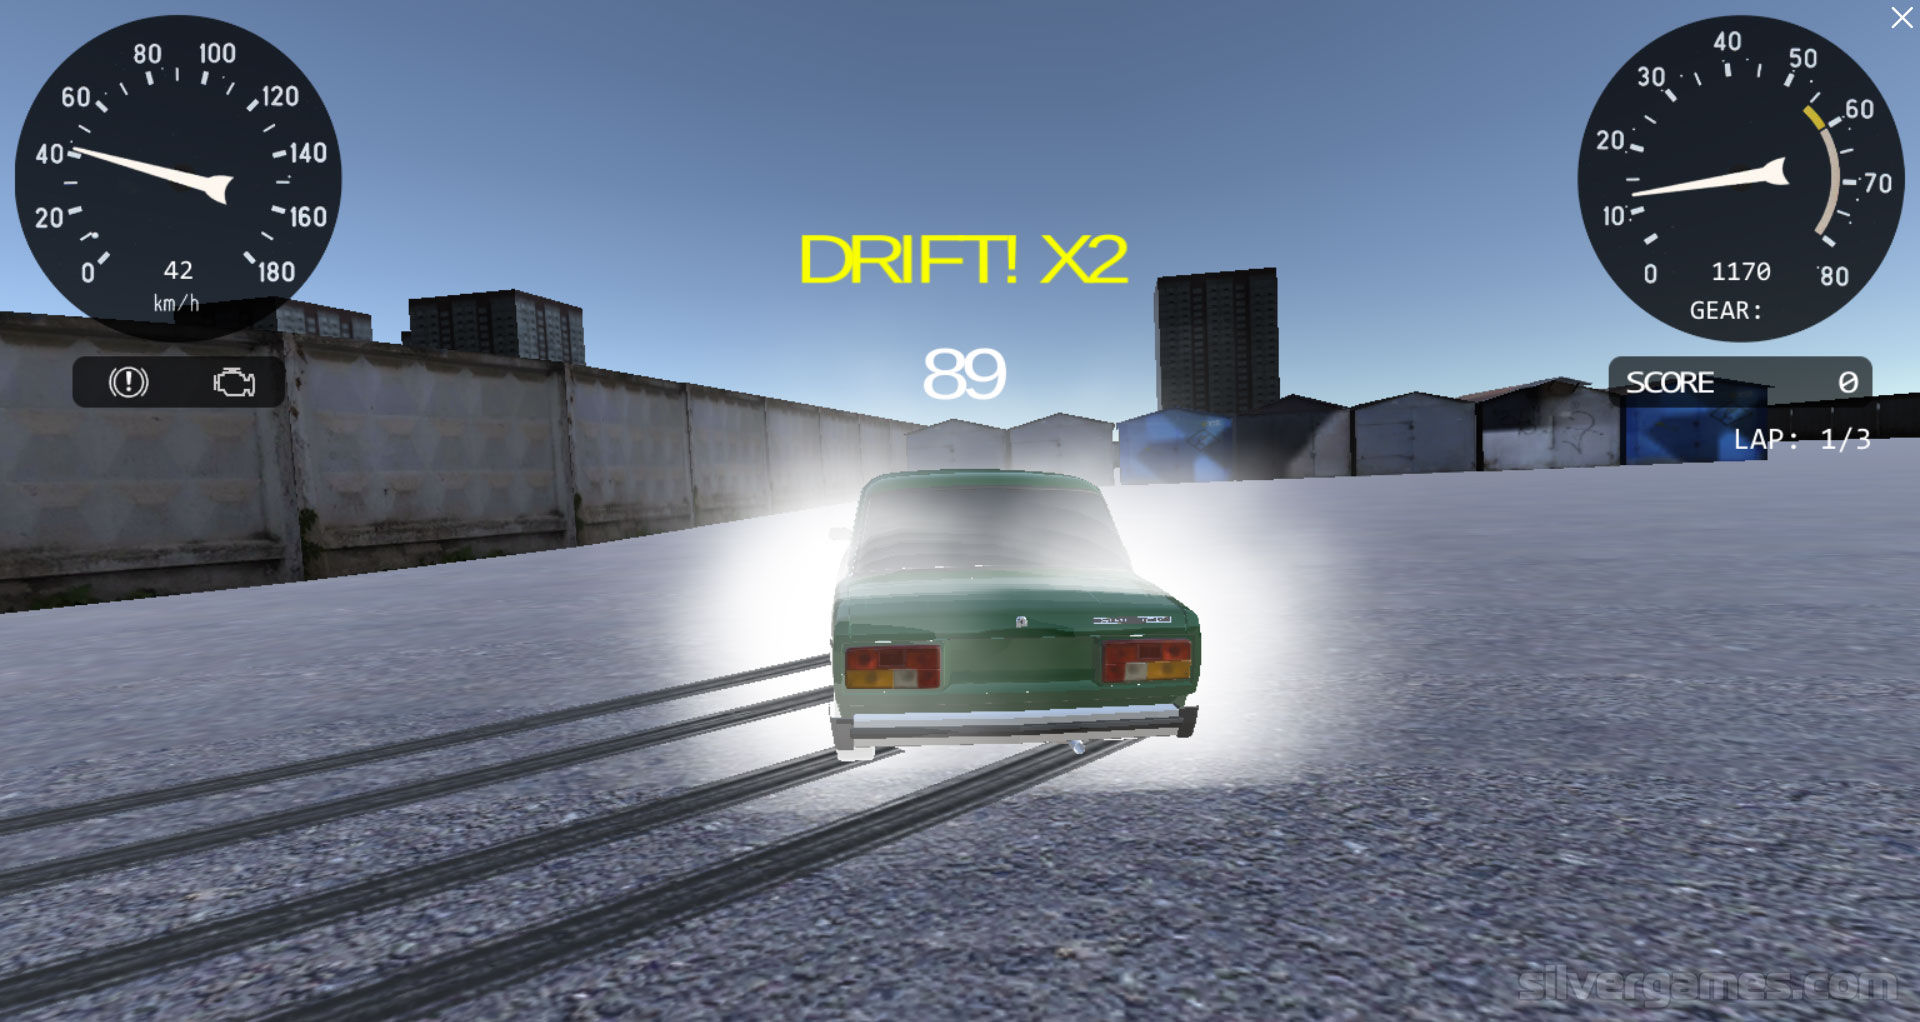 Ado Cars Drifter - Play Online on SilverGames 🕹️